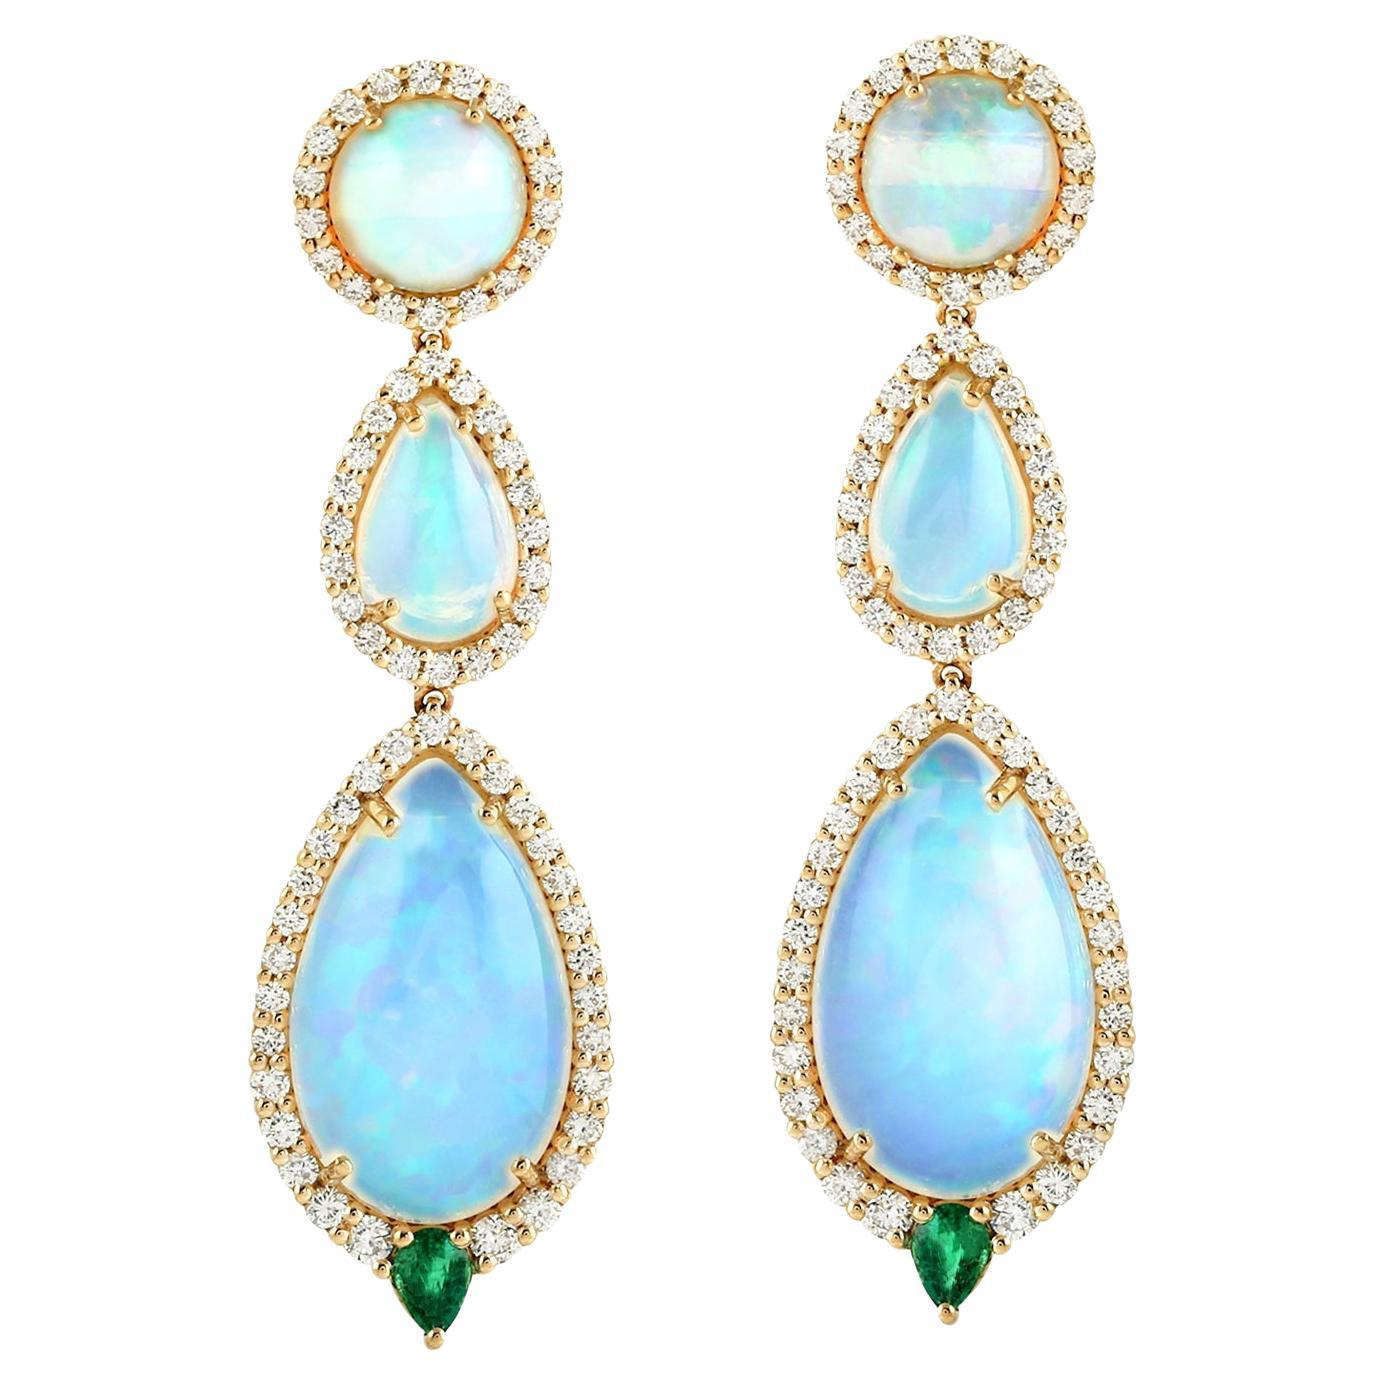 Opal Dangle Earrings With Emeralds and Diamonds 11.84 Carats 18K Gold